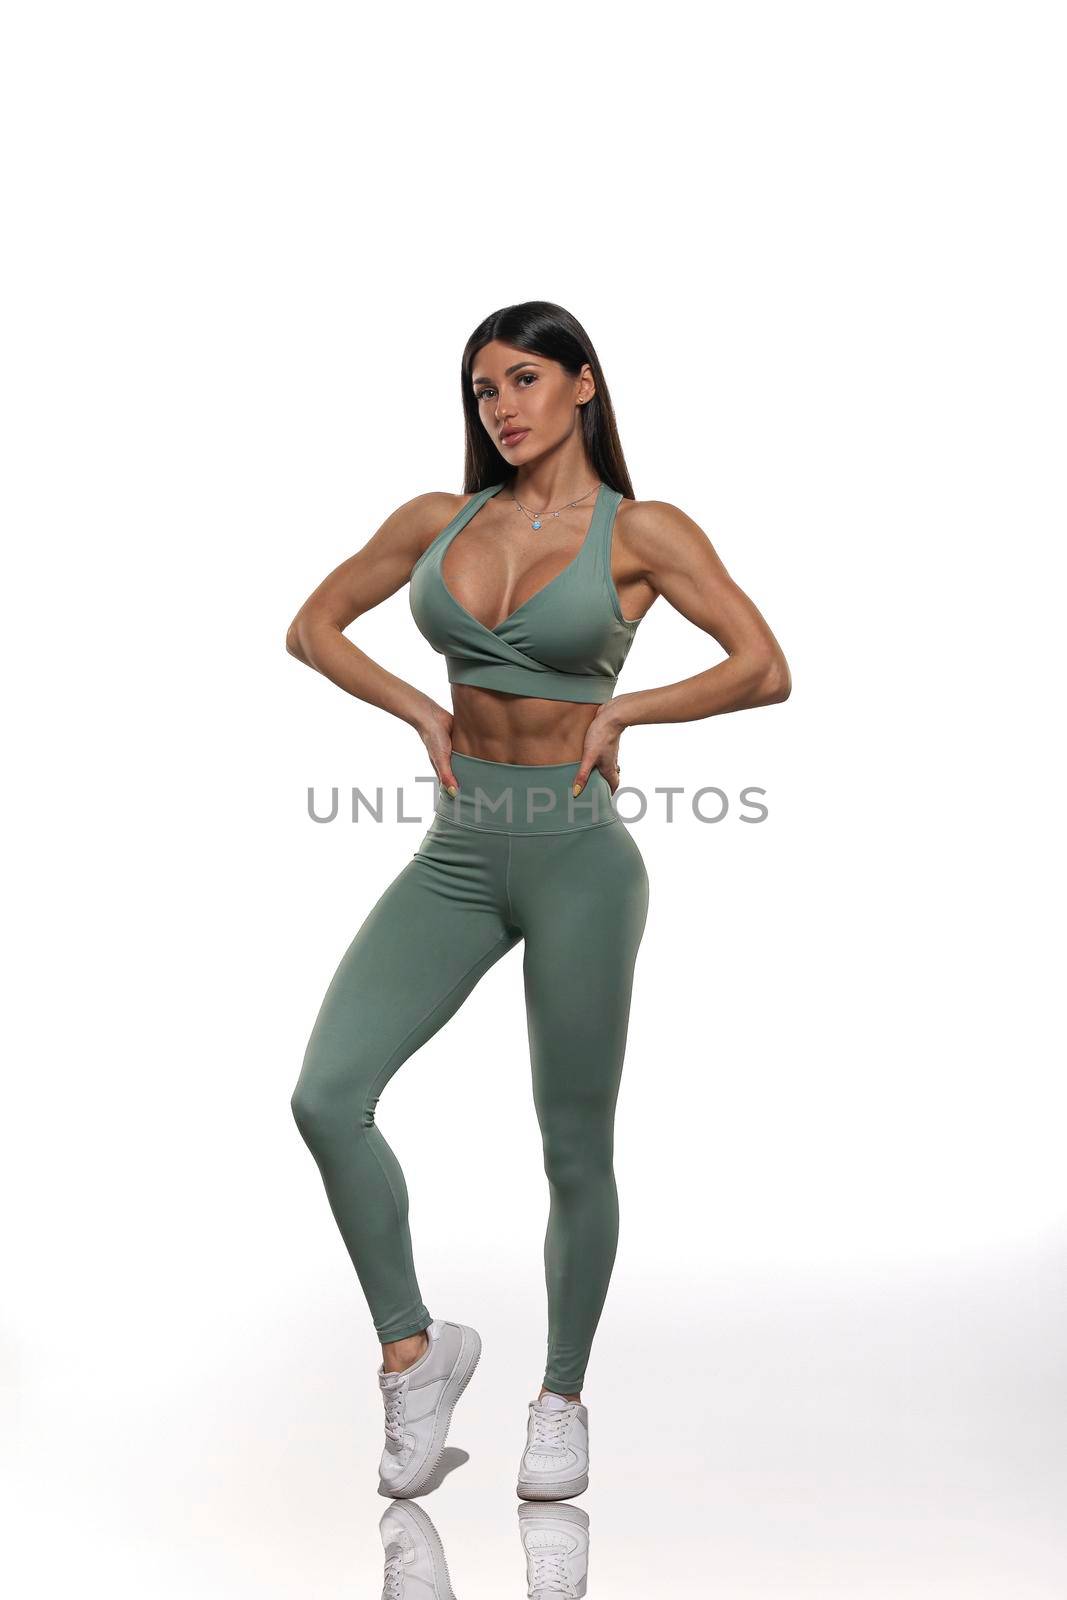 brunette girl in olive leggings and top on a white background